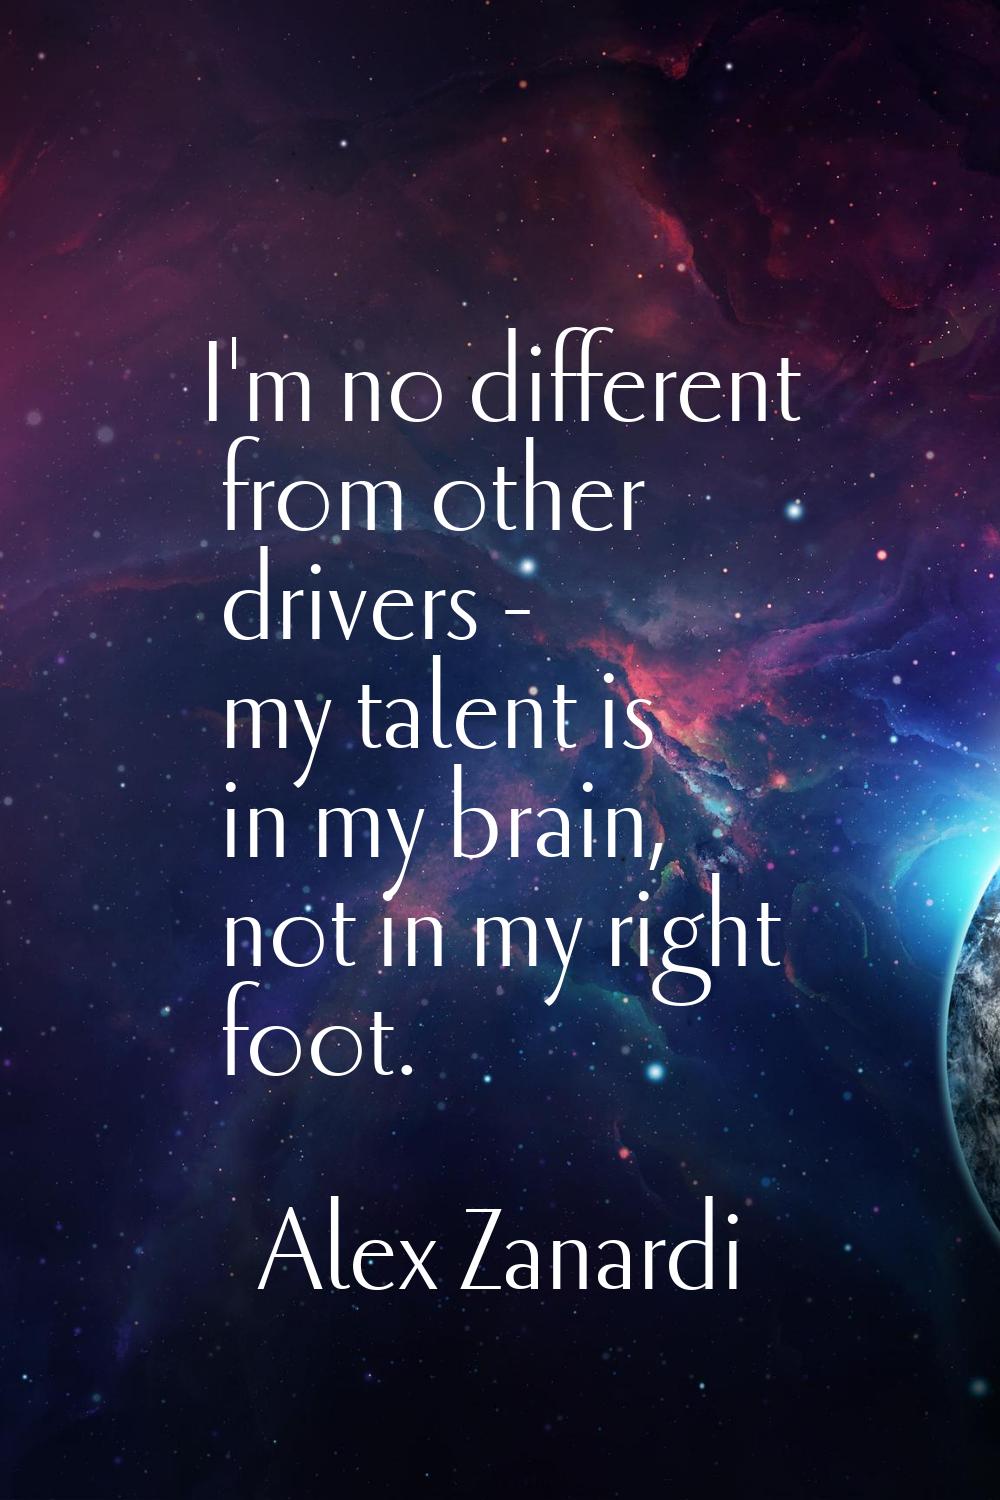 I'm no different from other drivers - my talent is in my brain, not in my right foot.